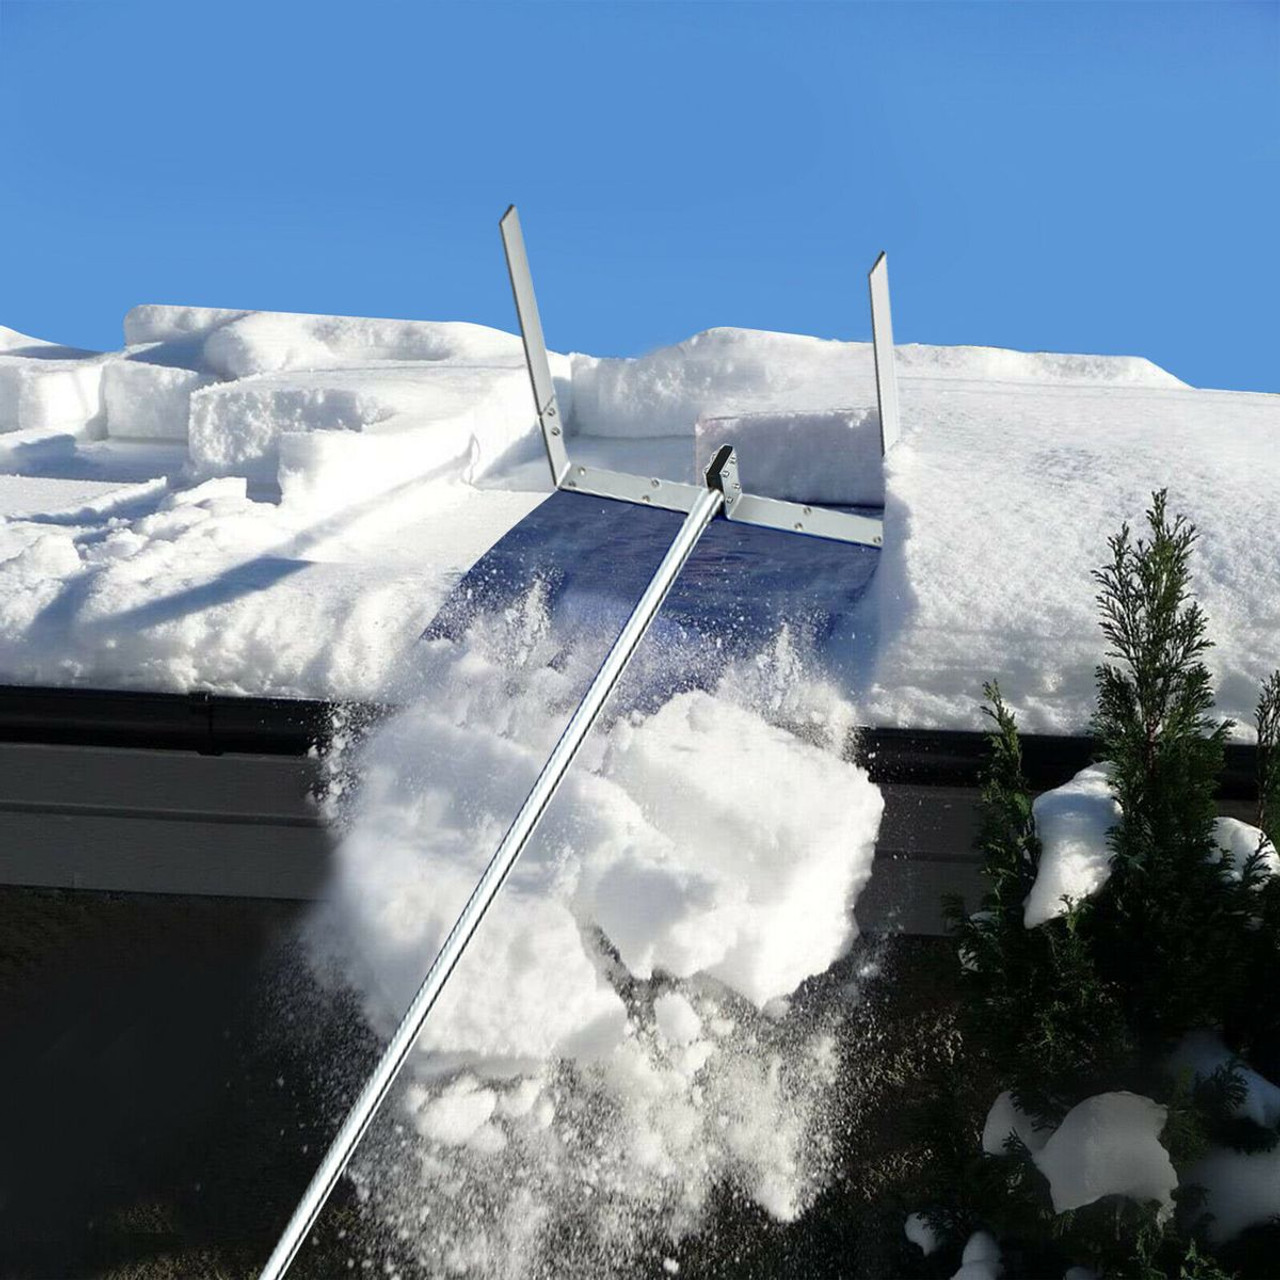 20-Foot Roof Snow Rake Removal Tool with Adjustable Handle product image